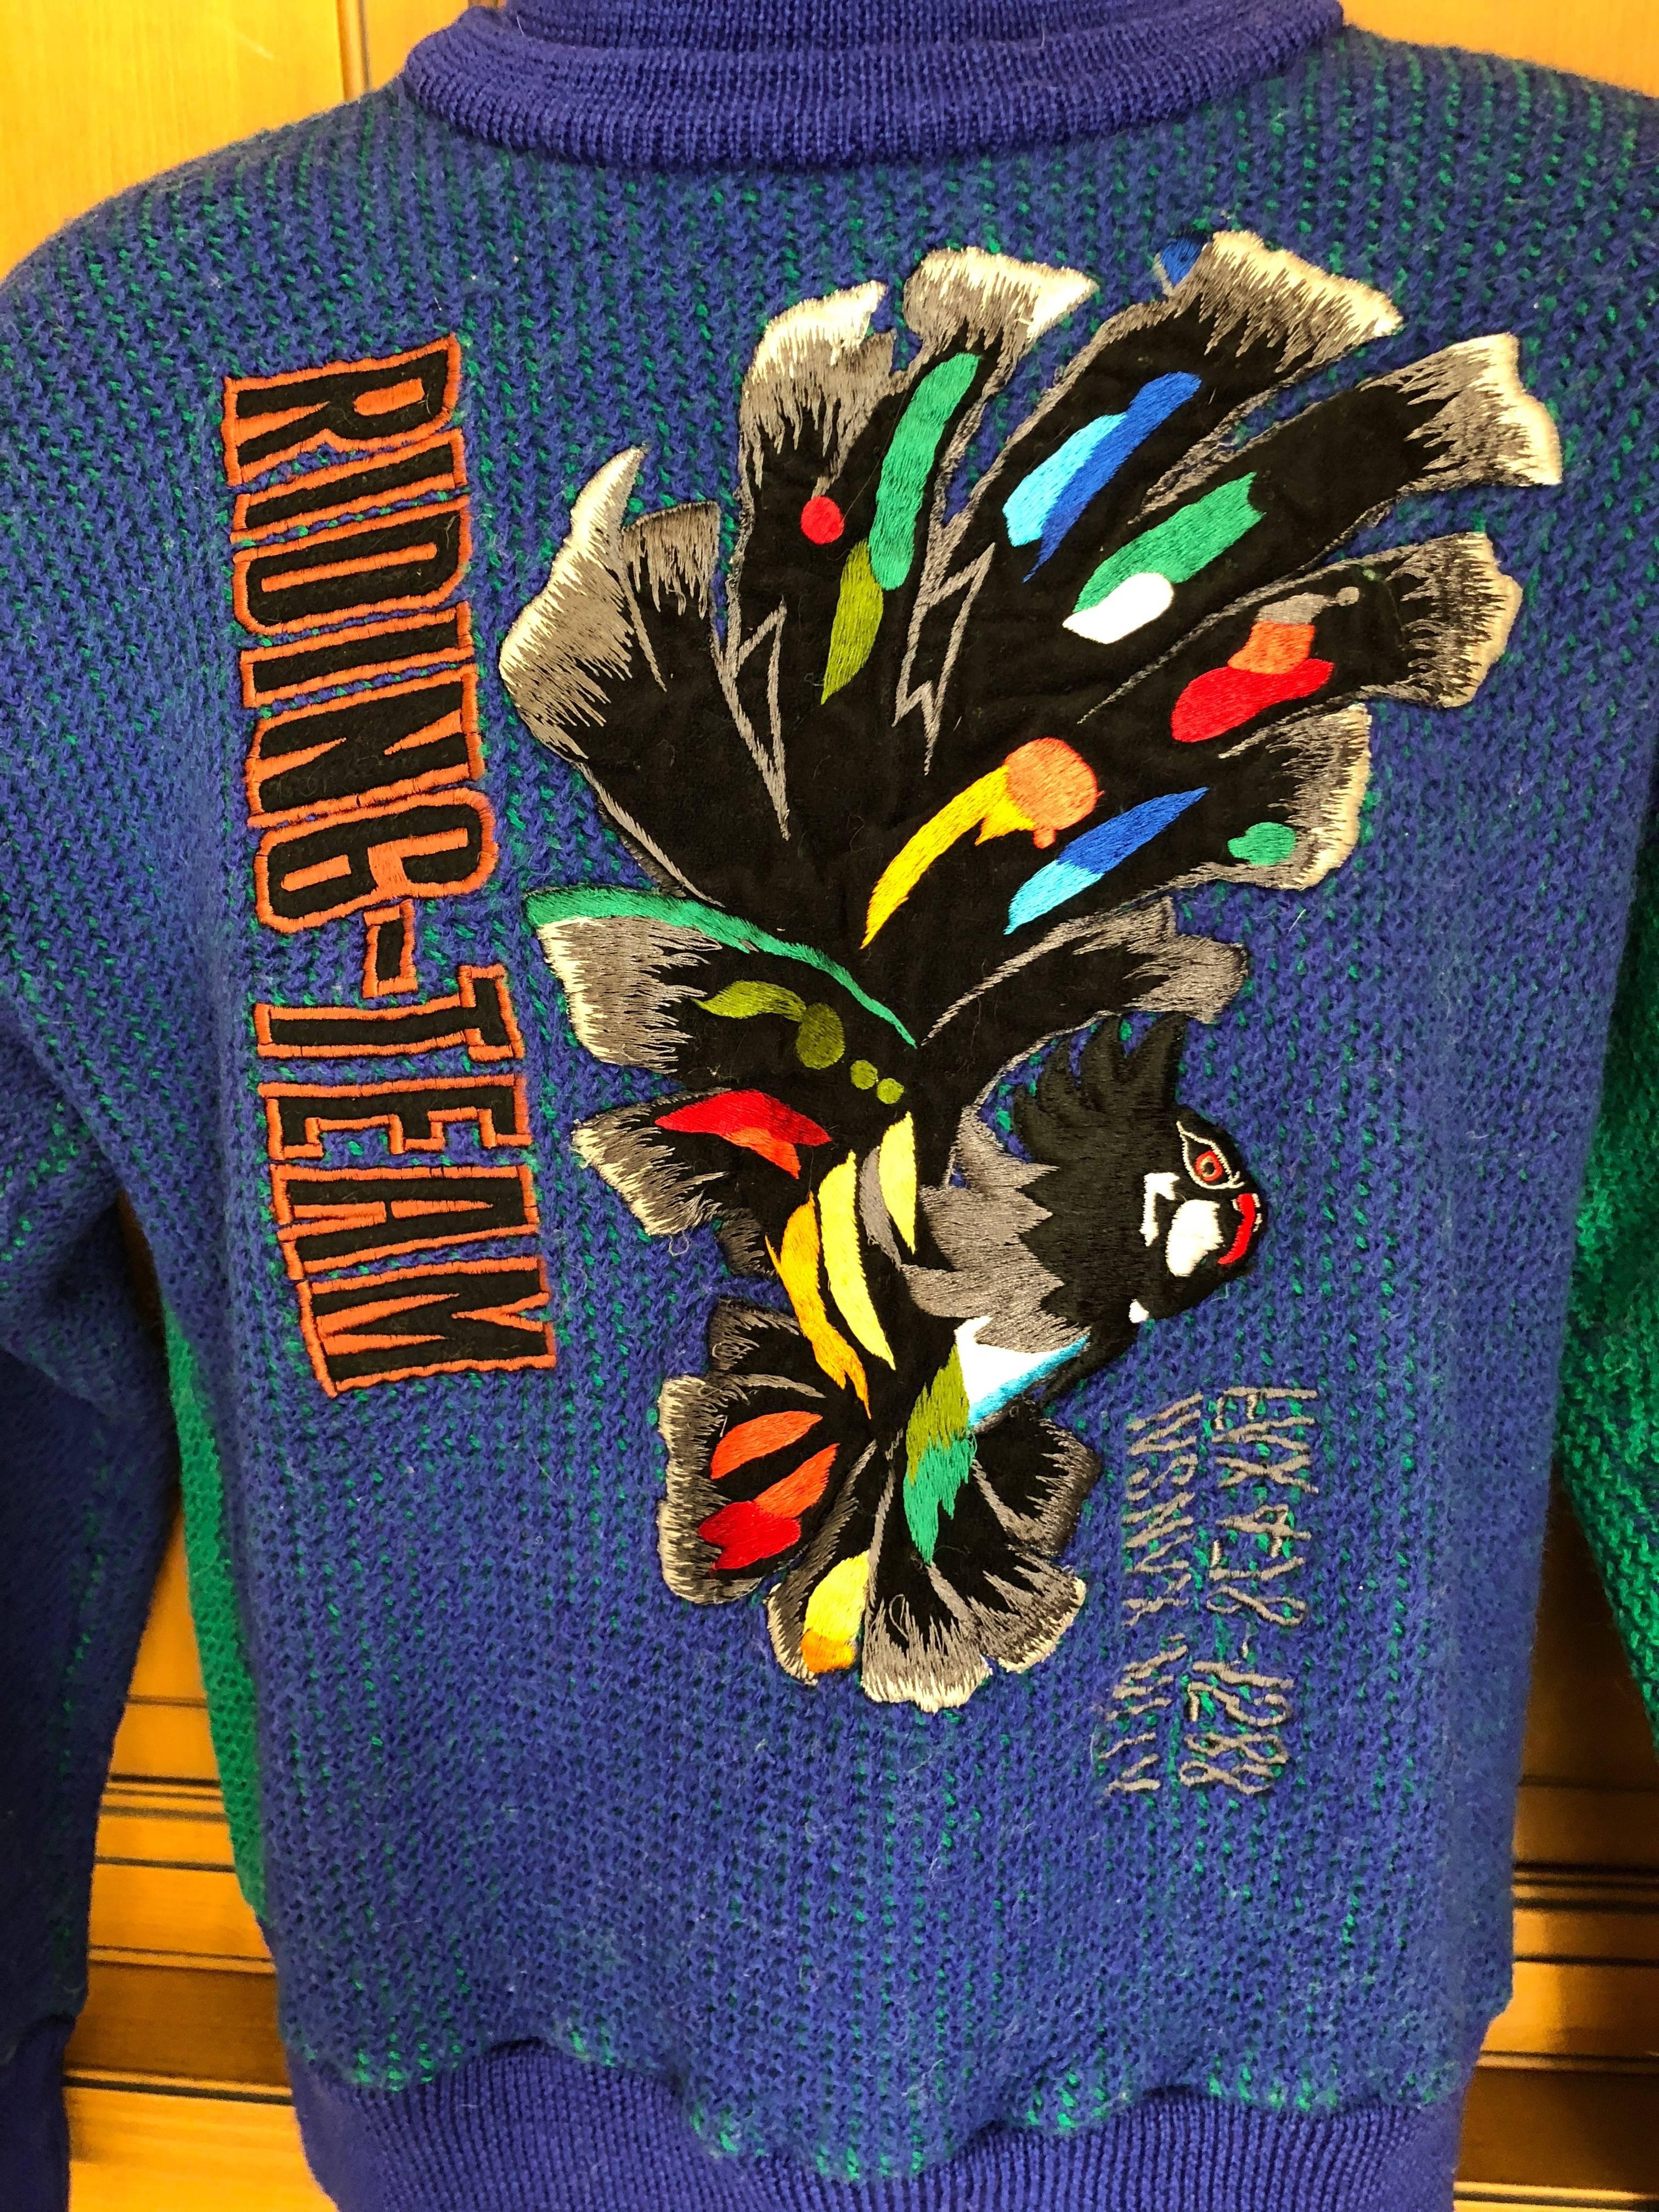 Kansai Yamamoto 1980's Men's Sweater with Bird Embellishment  In Excellent Condition For Sale In Cloverdale, CA